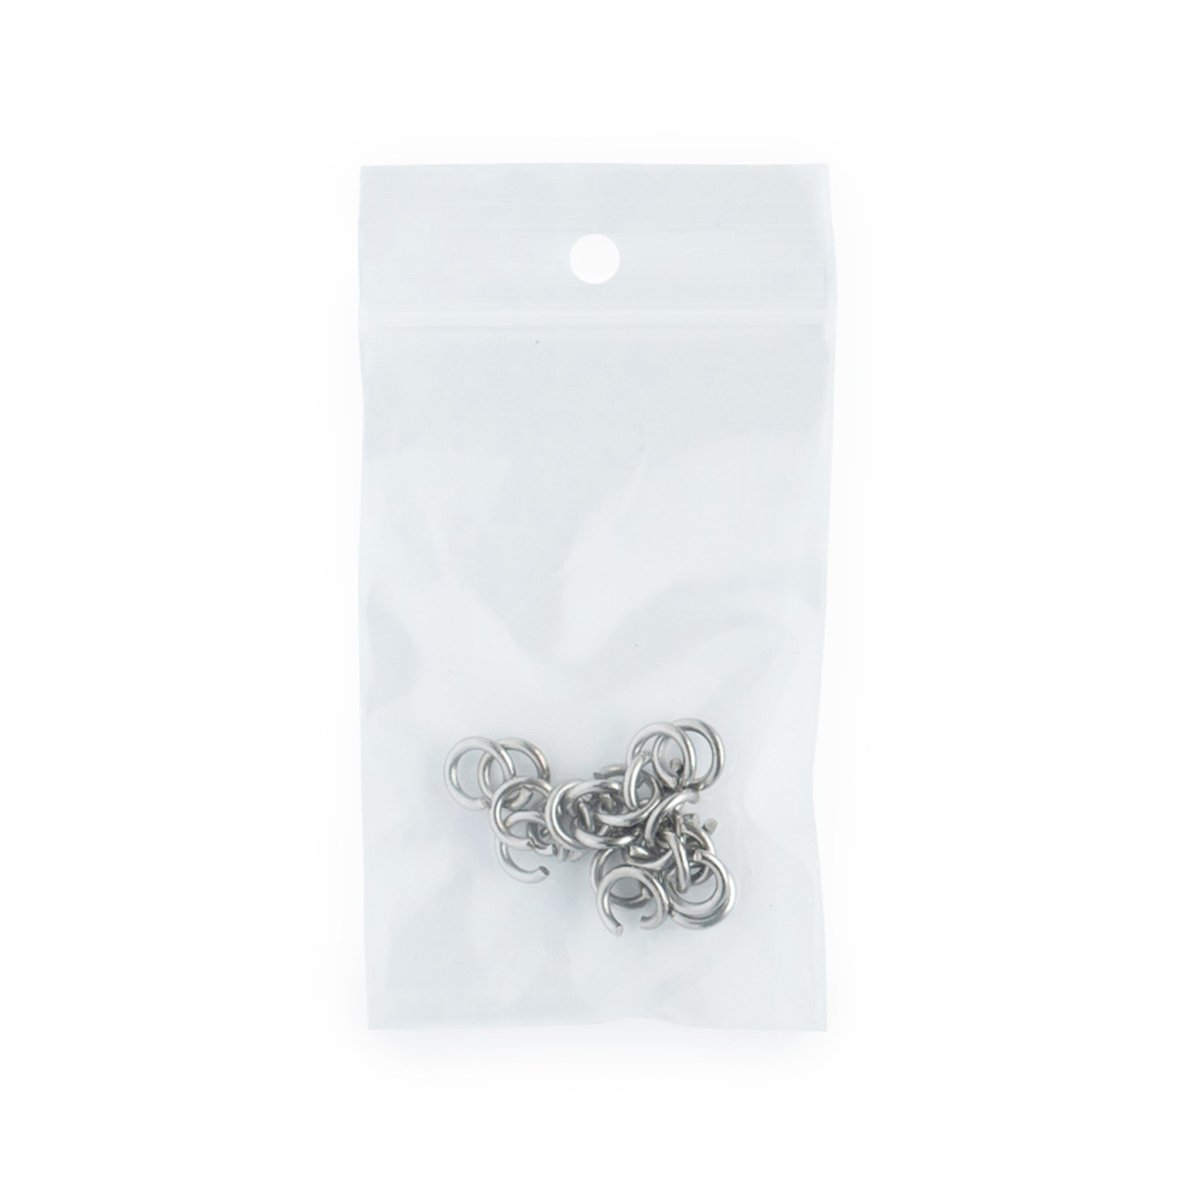 Accessories Jump Rings 8mm from Cara & Co Craft Supply